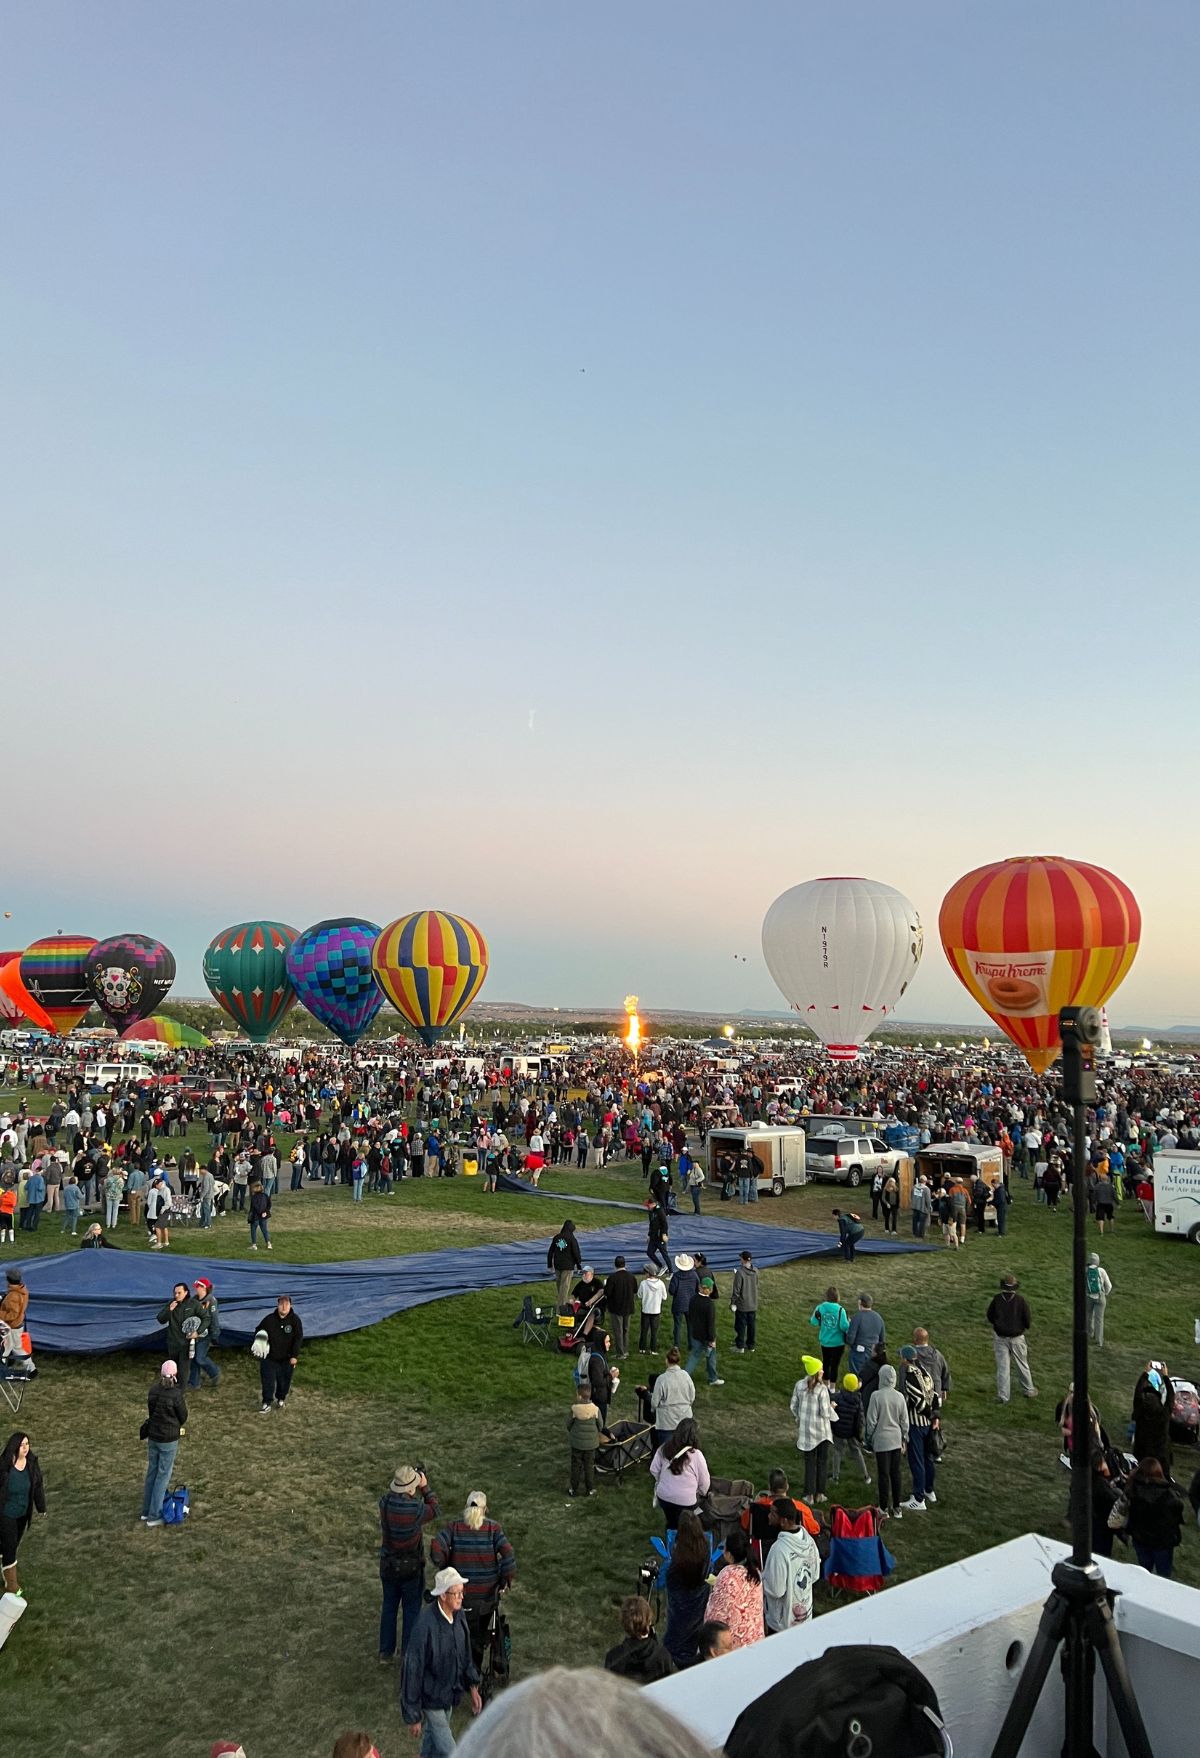 A group of people watching a large group of hot air balloons.